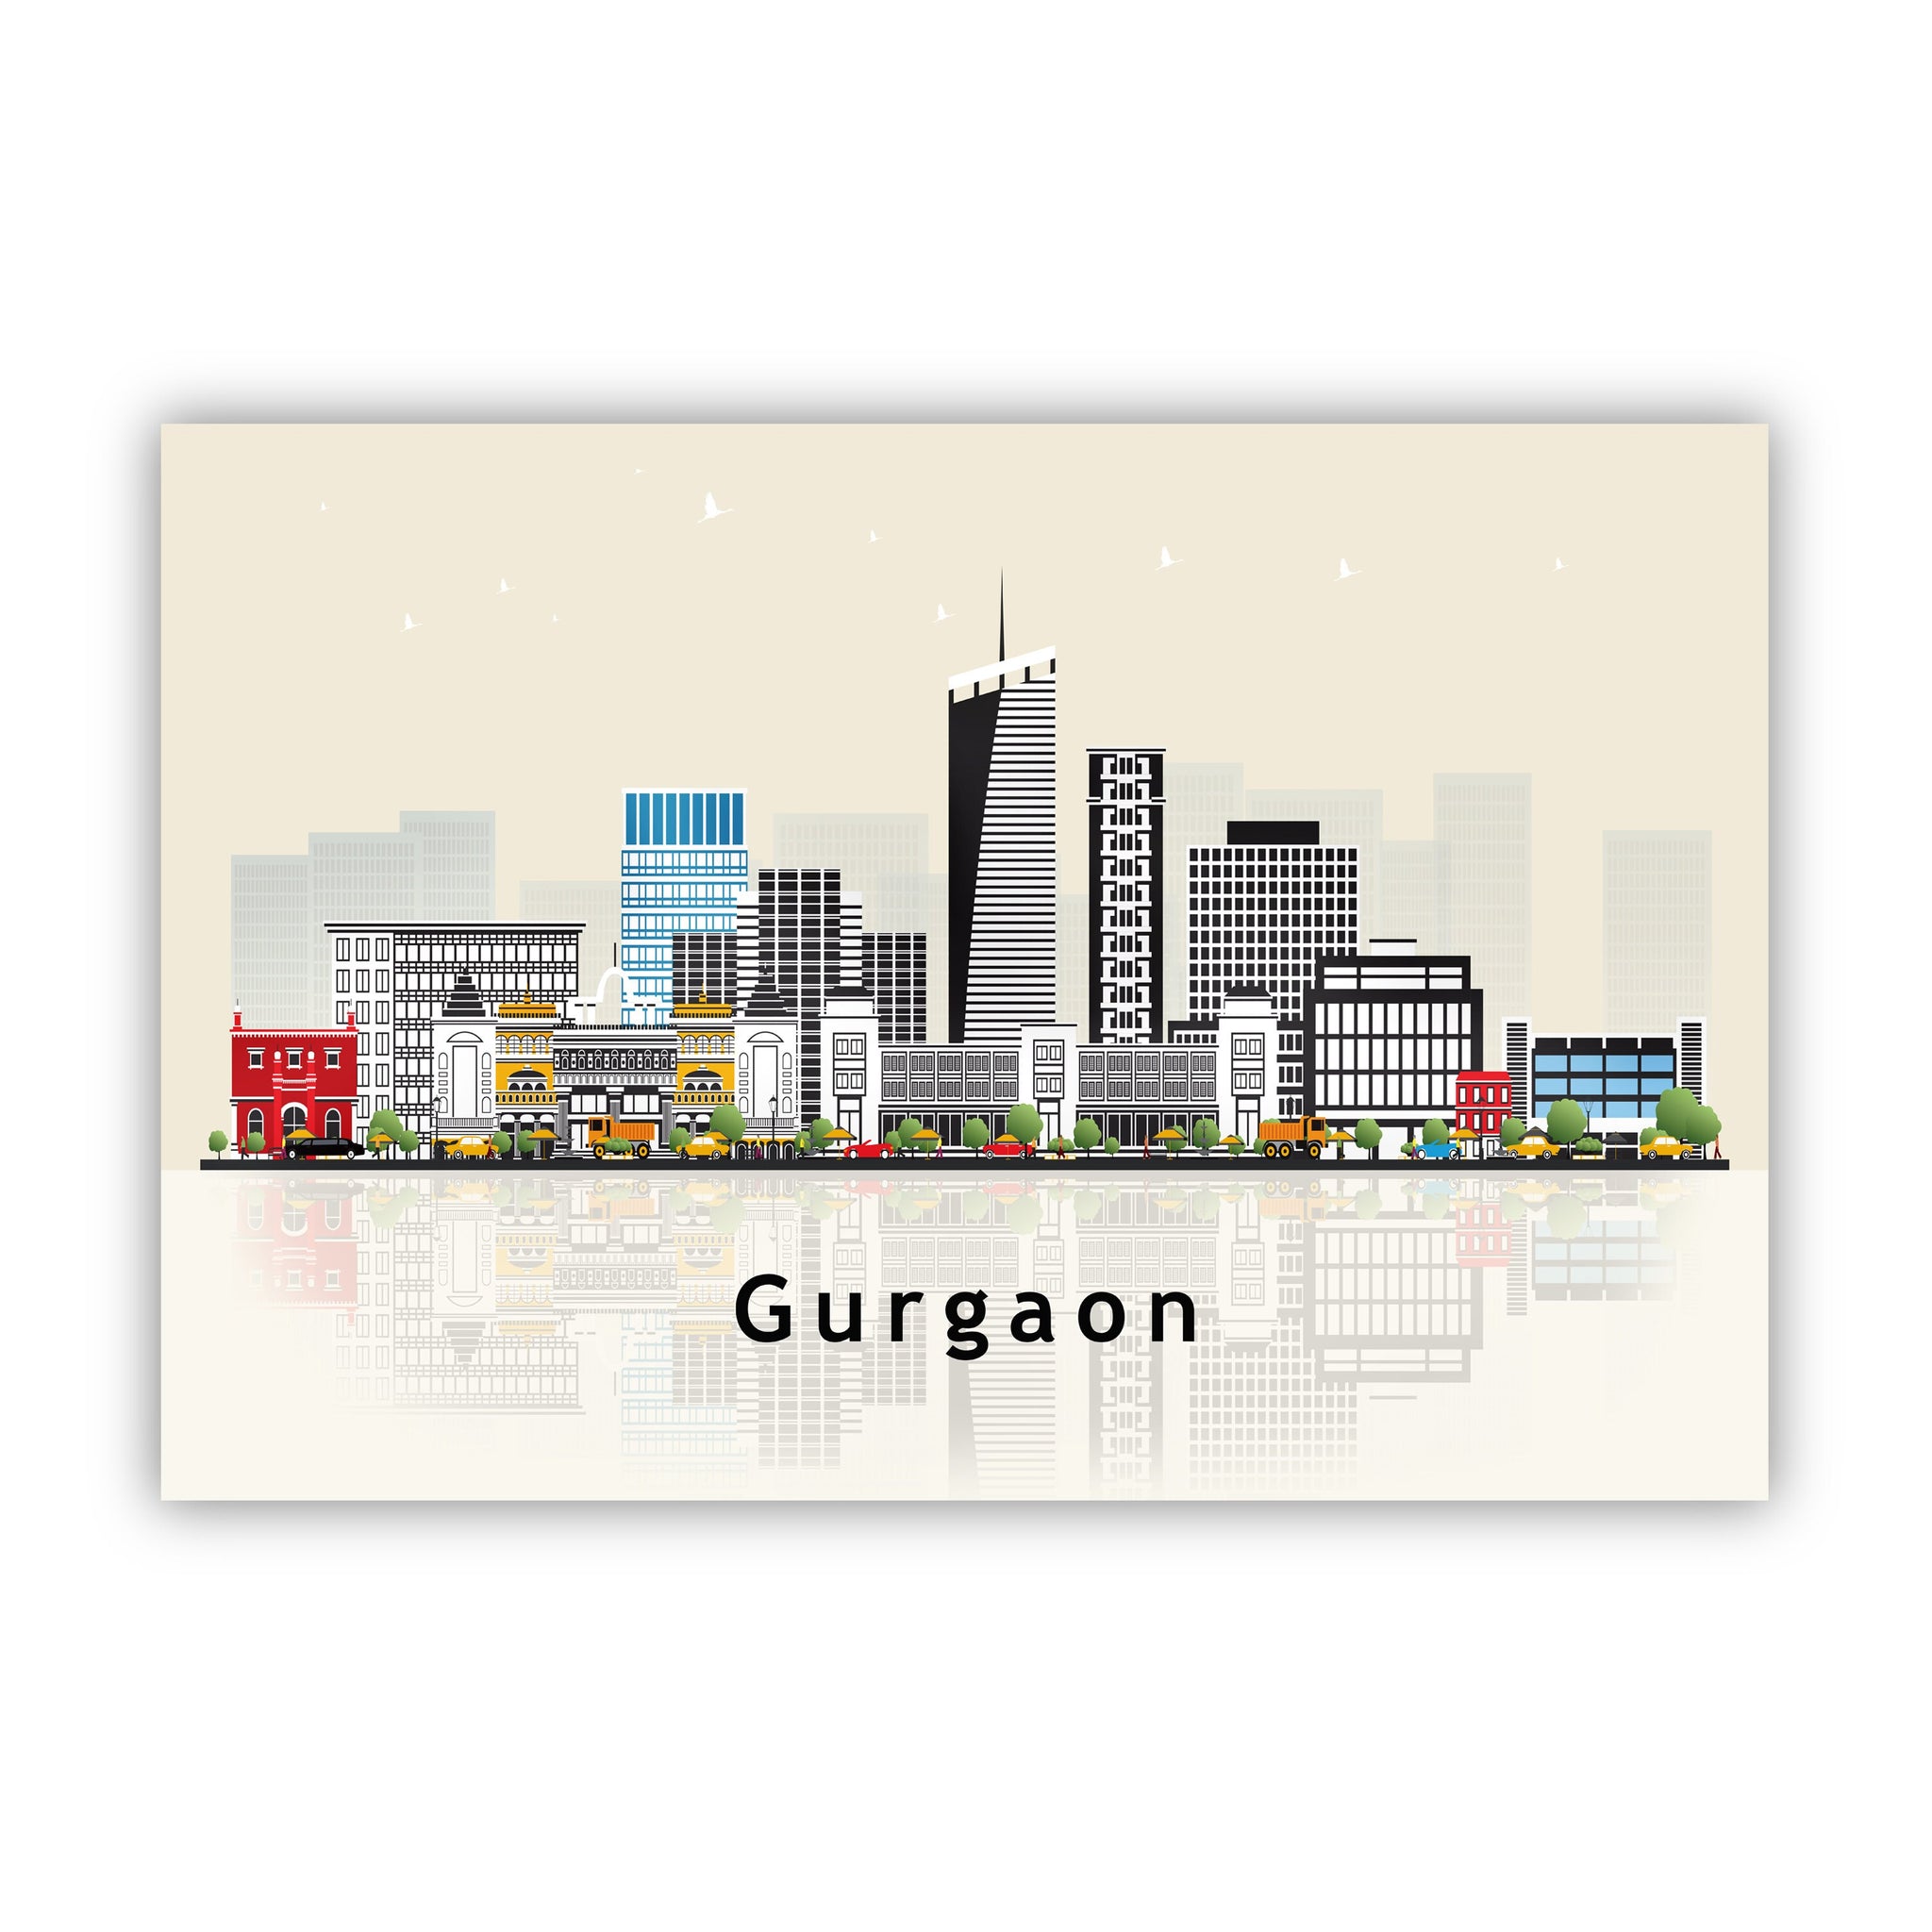 GURGAON INDIA Illustration skyline poster, Modern skyline cityscape poster, India city skyline landmark map poster, Home wall decoration